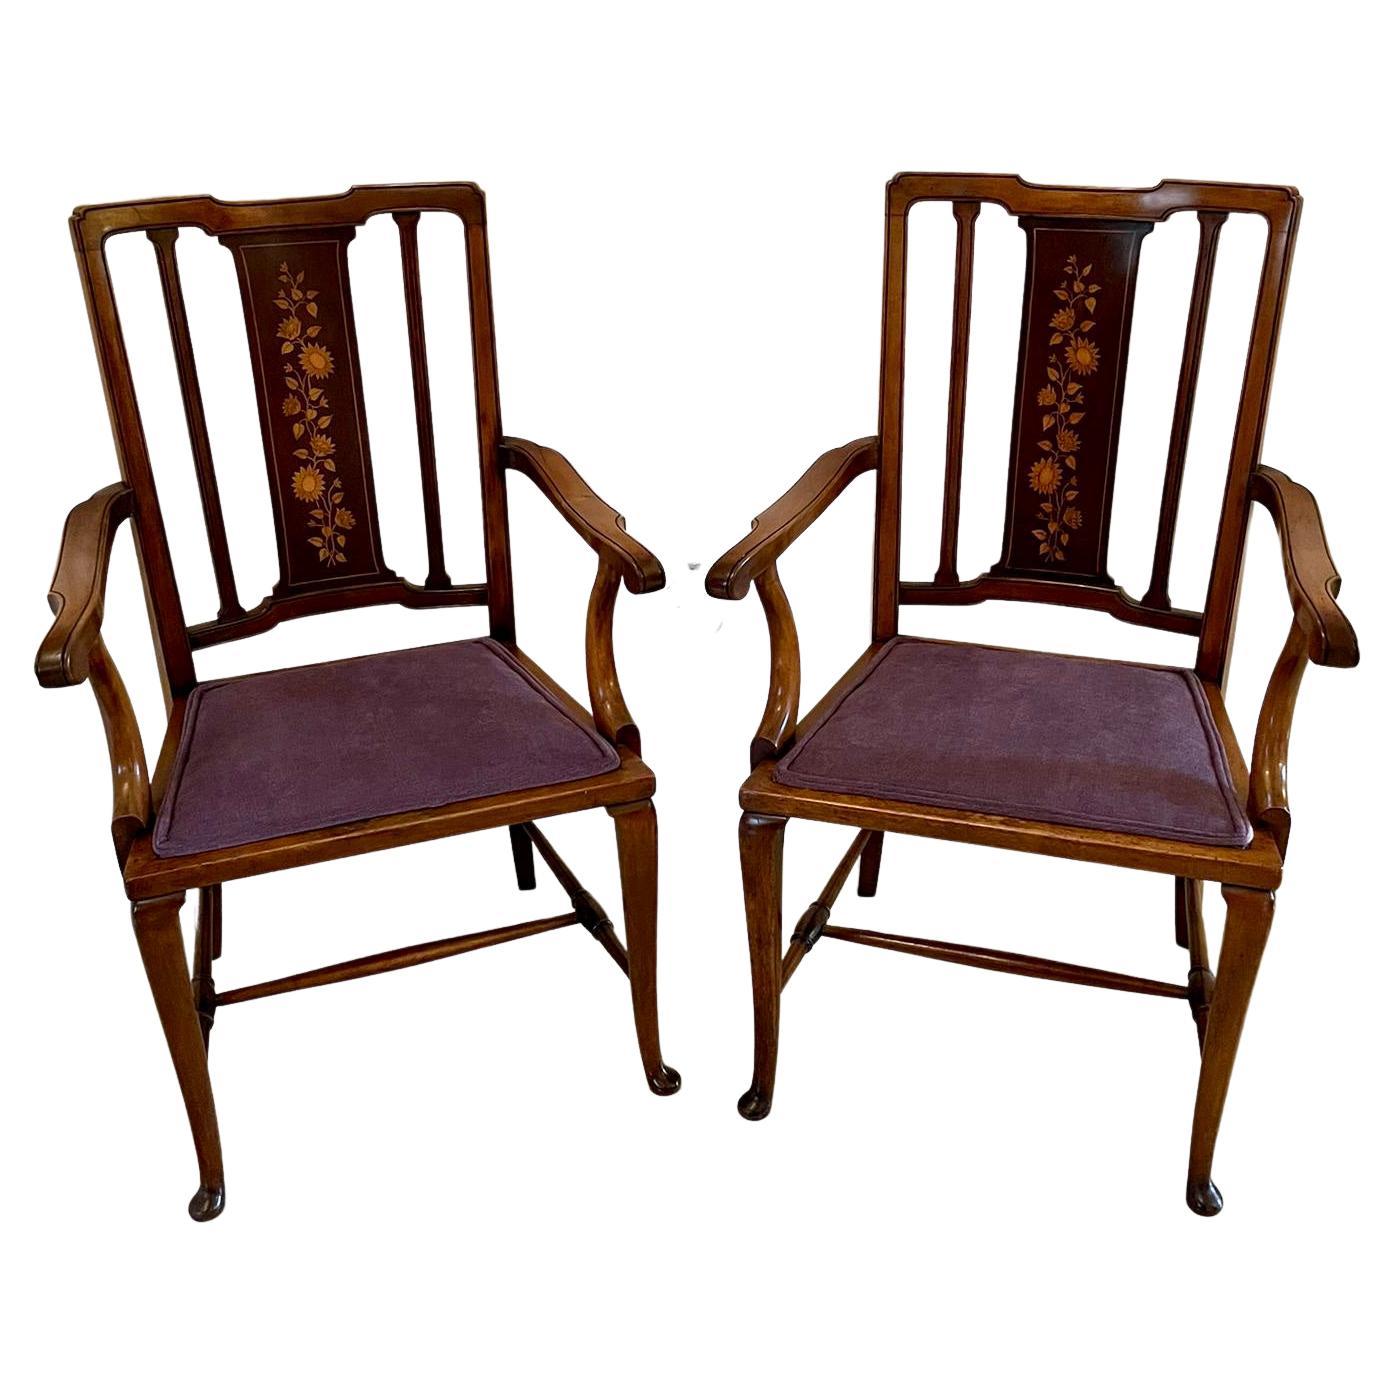 Pair of Antique Edwardian Inlaid Mahogany Desk Chairs For Sale